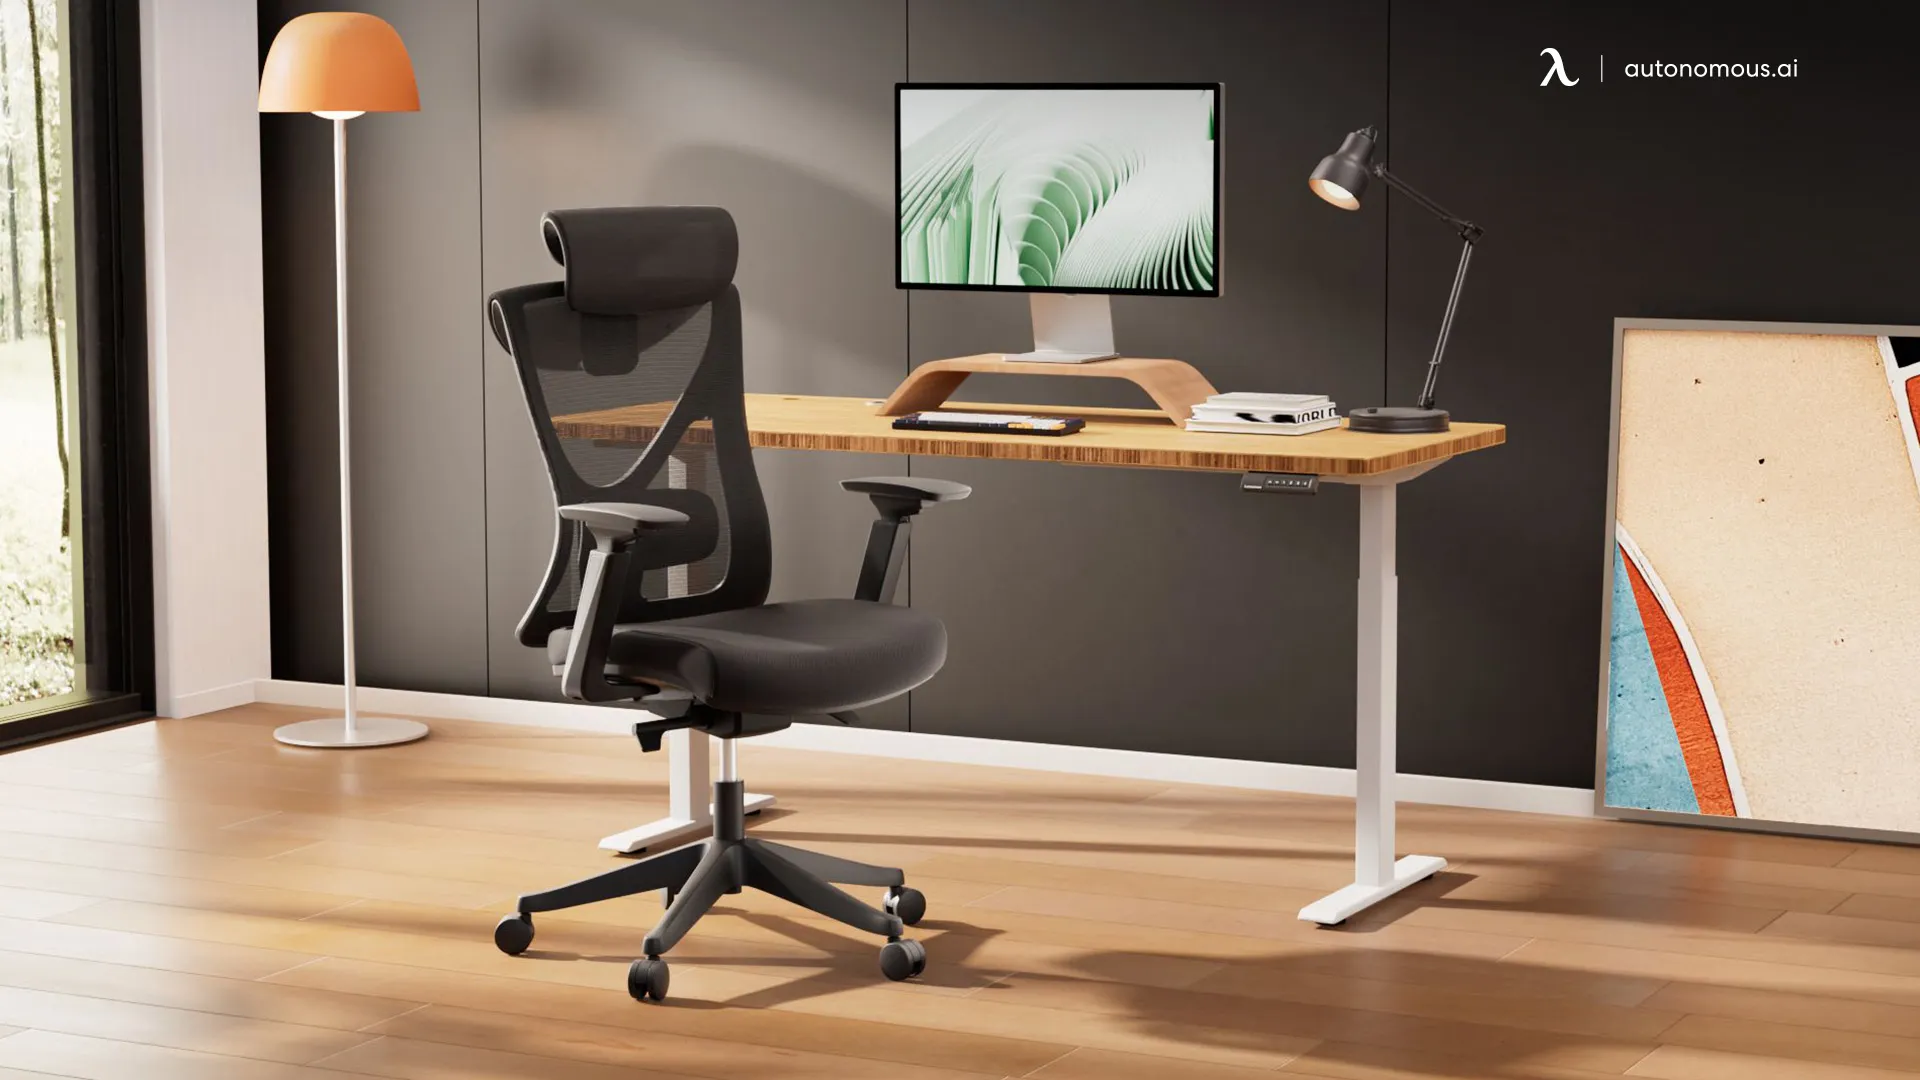 Stand-up Desk vs. Traditional Desk: Which Is Better?